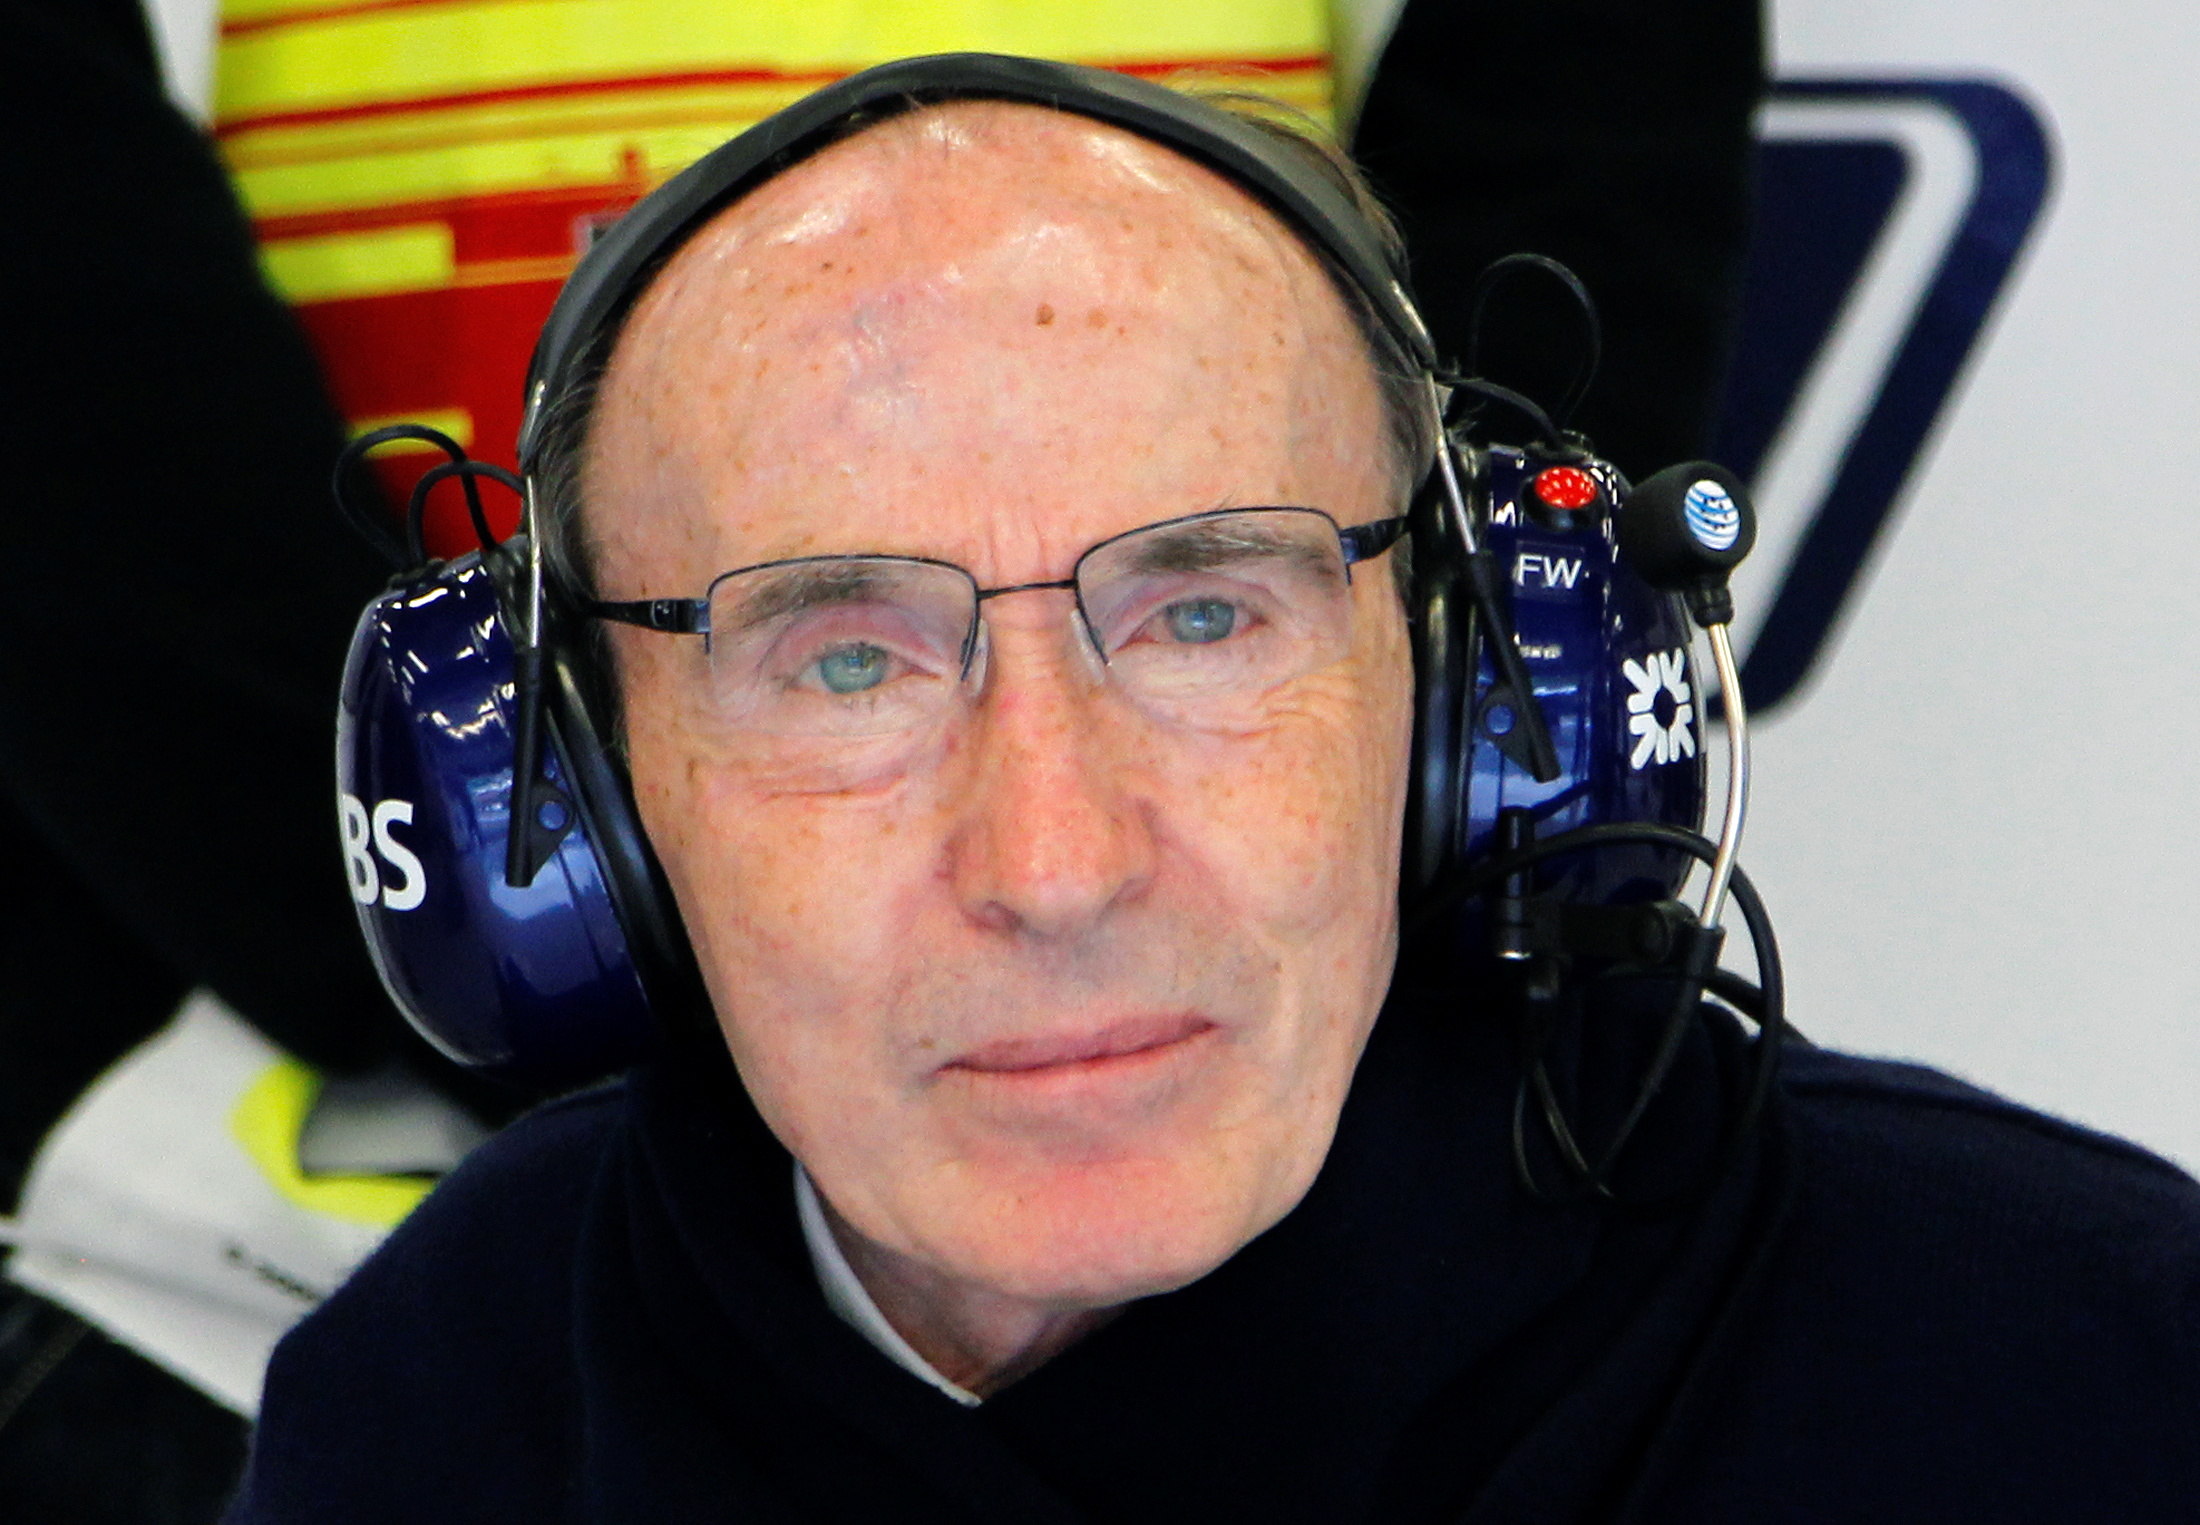 Frank Williams, founder of the Williams Formula One team, looks on during the third free practice session of the Belgian F1 Grand Prix in Spa Francorchamps August 28, 2010.  REUTERS/Francois Lenoir/File Photo